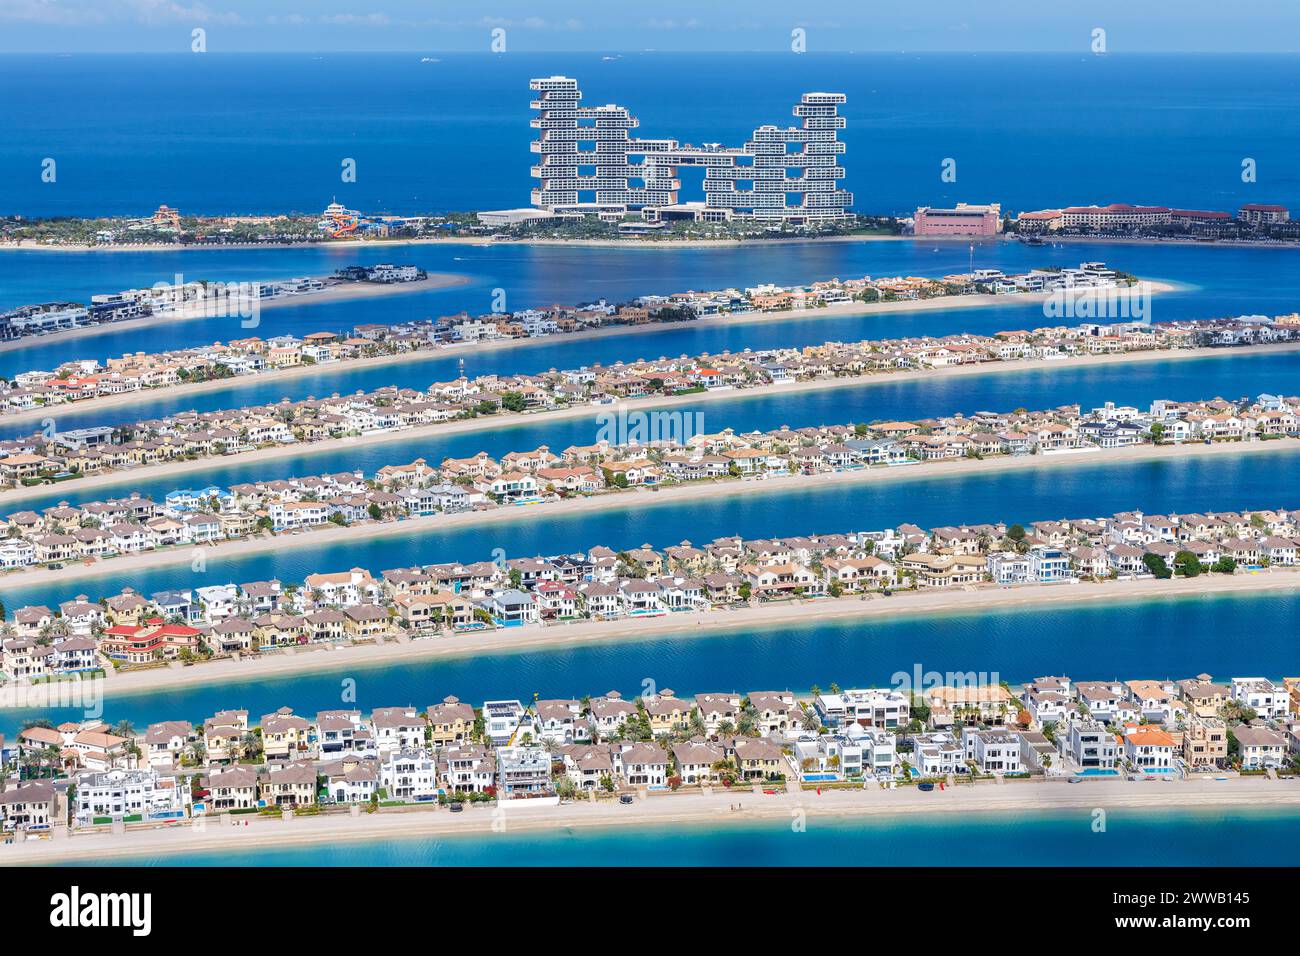 Dubai The Palm Jumeirah with Atlantis The Royal Hotel artificial island from above luxury Stock Photo